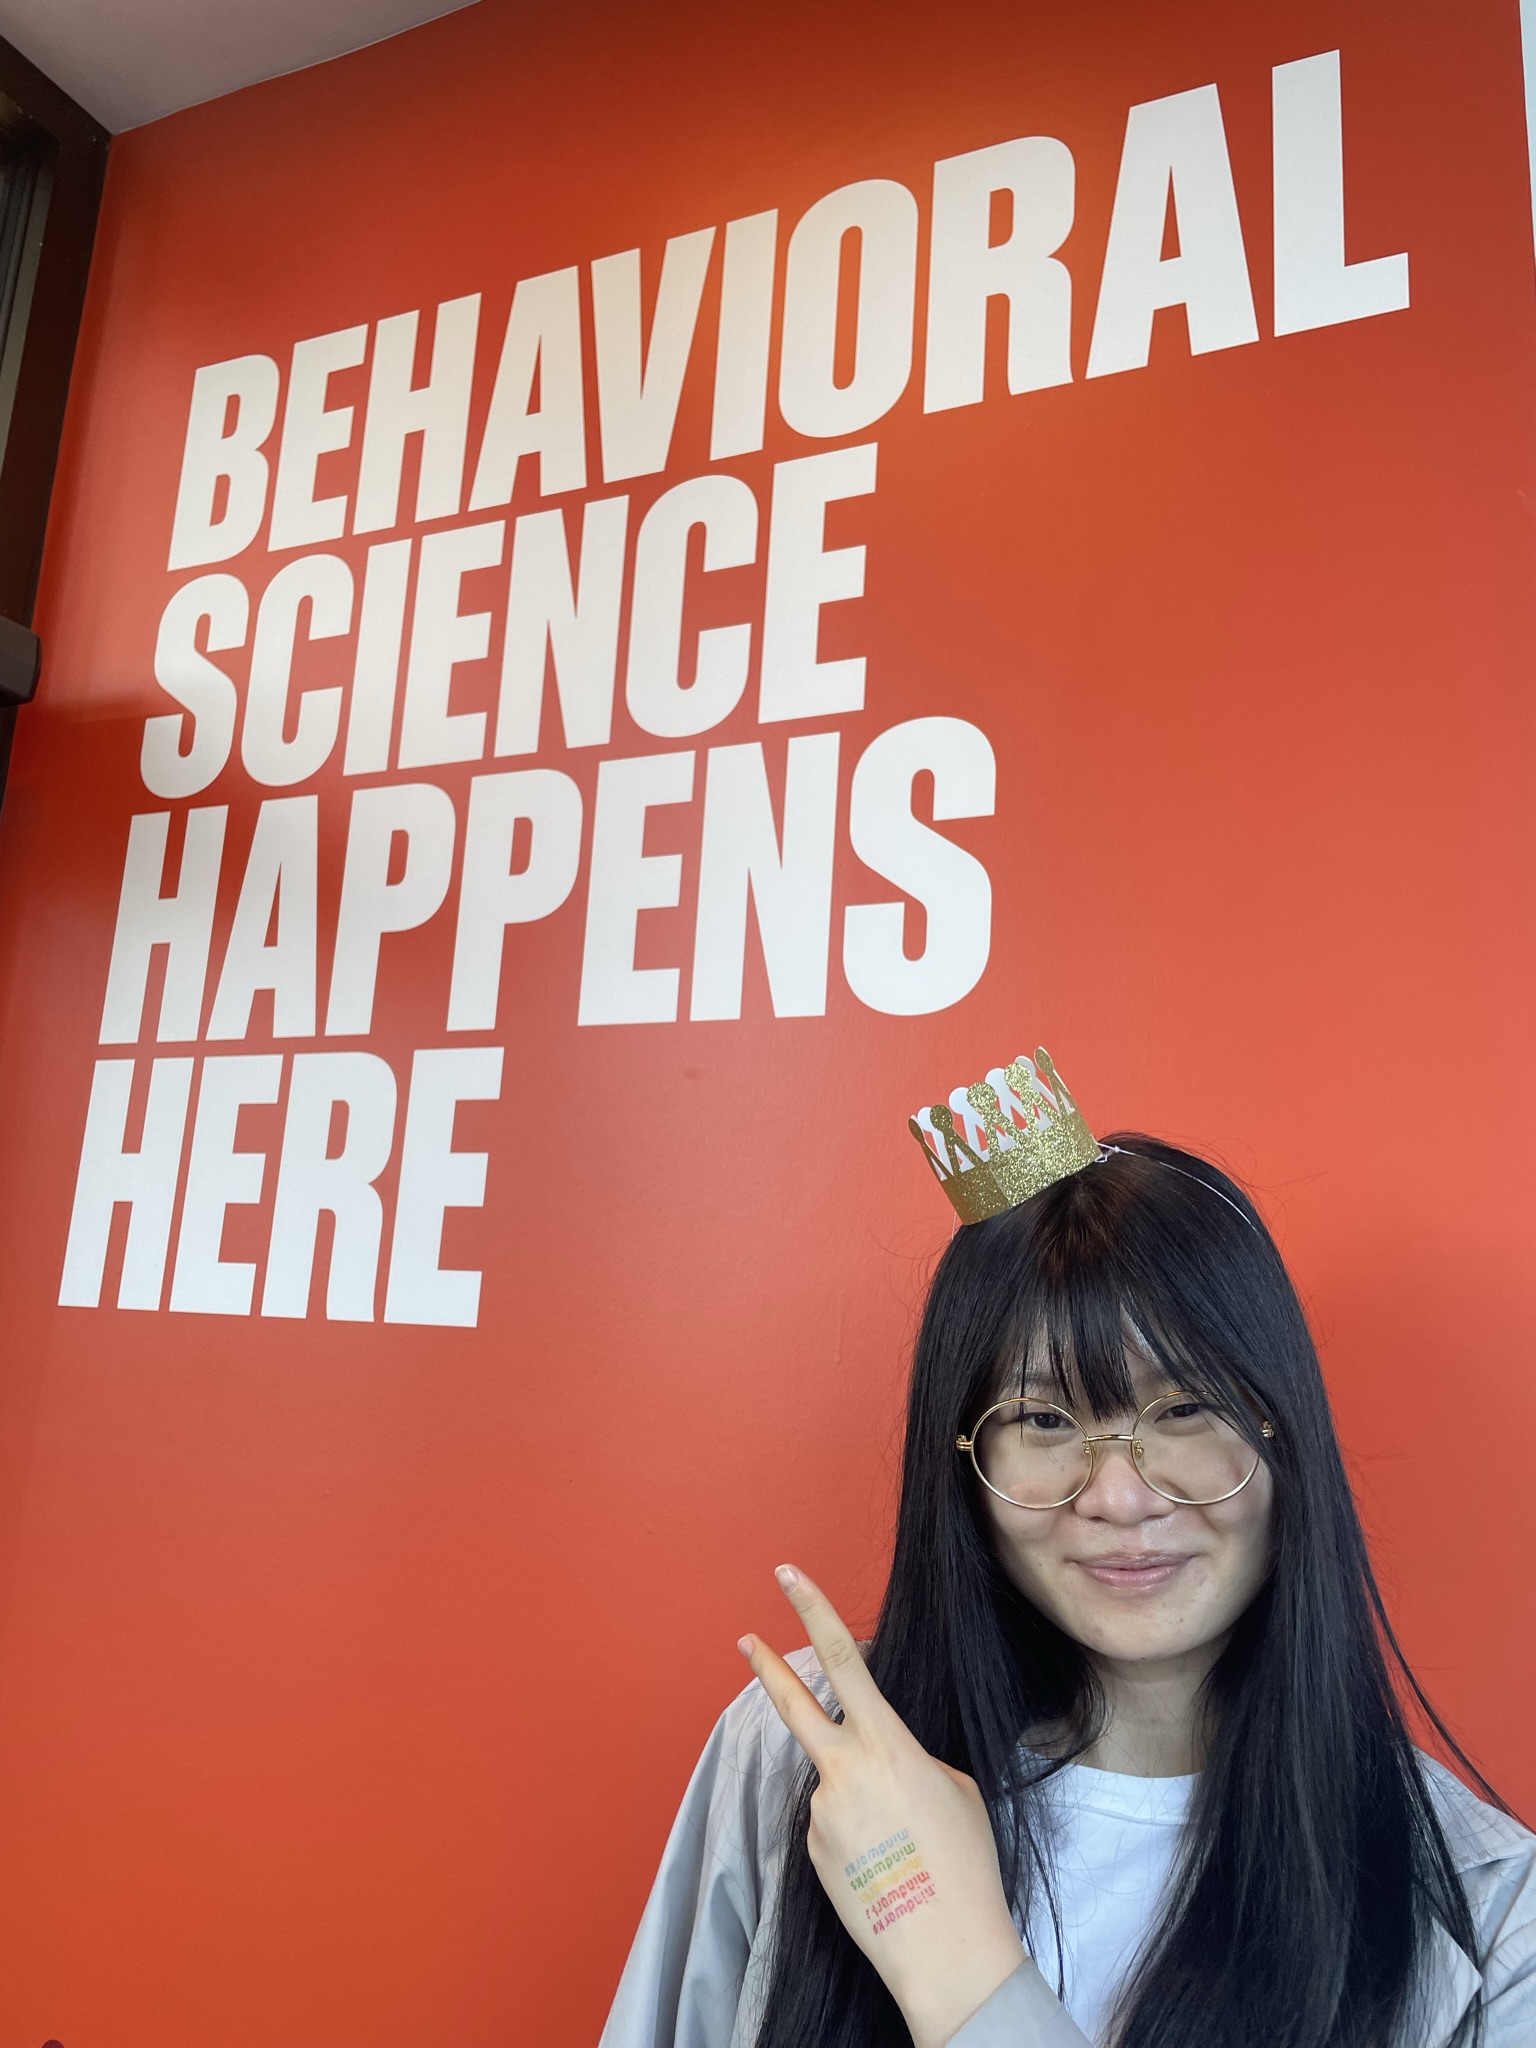 A research assistant poses in front of a wall that says "behavioral science happens here"